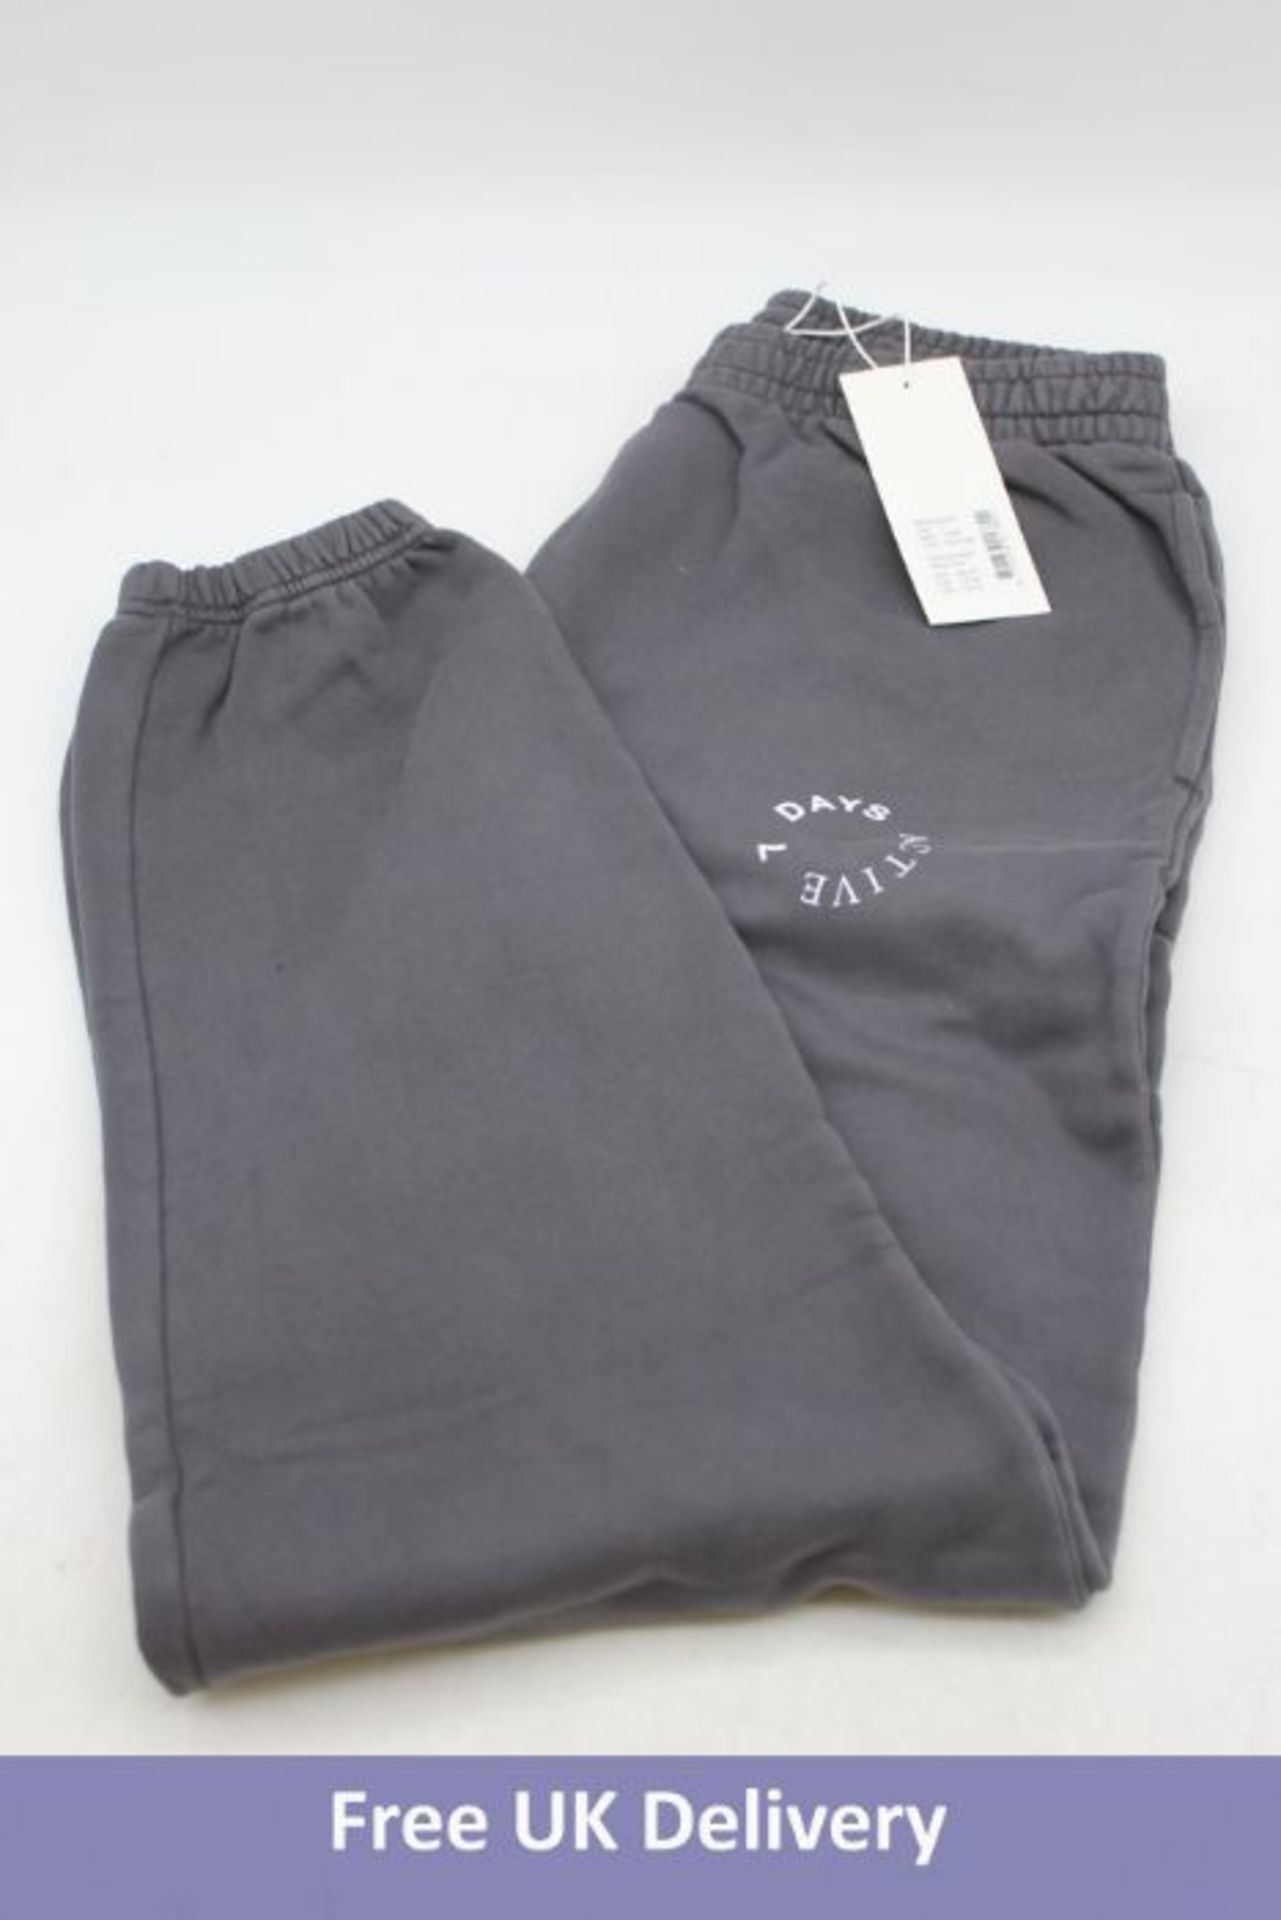 Two 7 Days Active Monday Pants, Dark Grey, L - Image 2 of 2